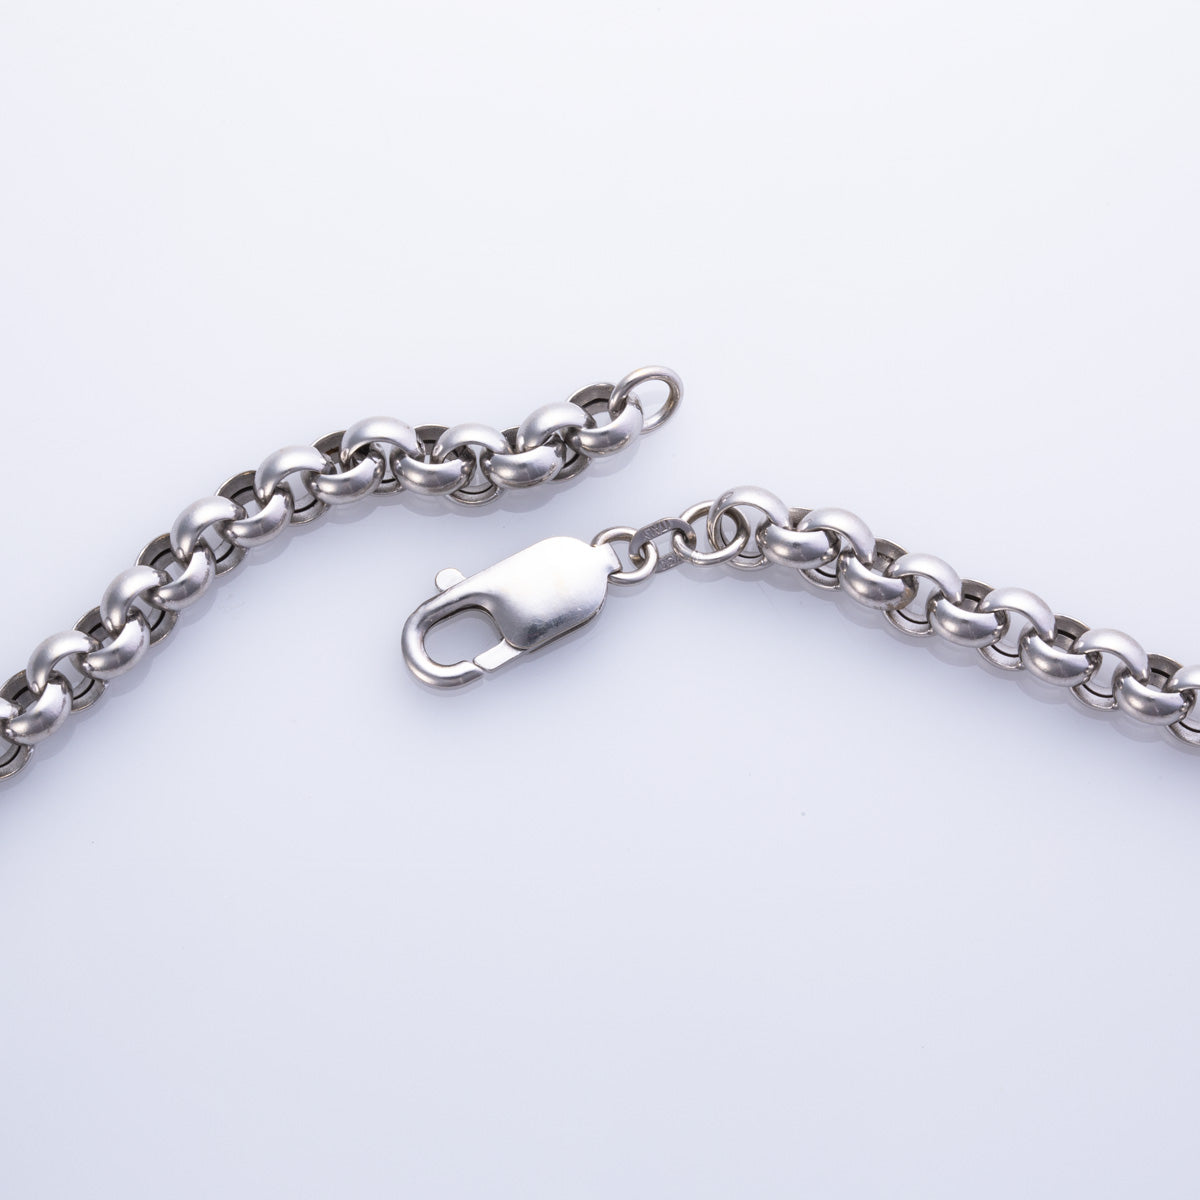 18k White Gold Cable Chain | 18